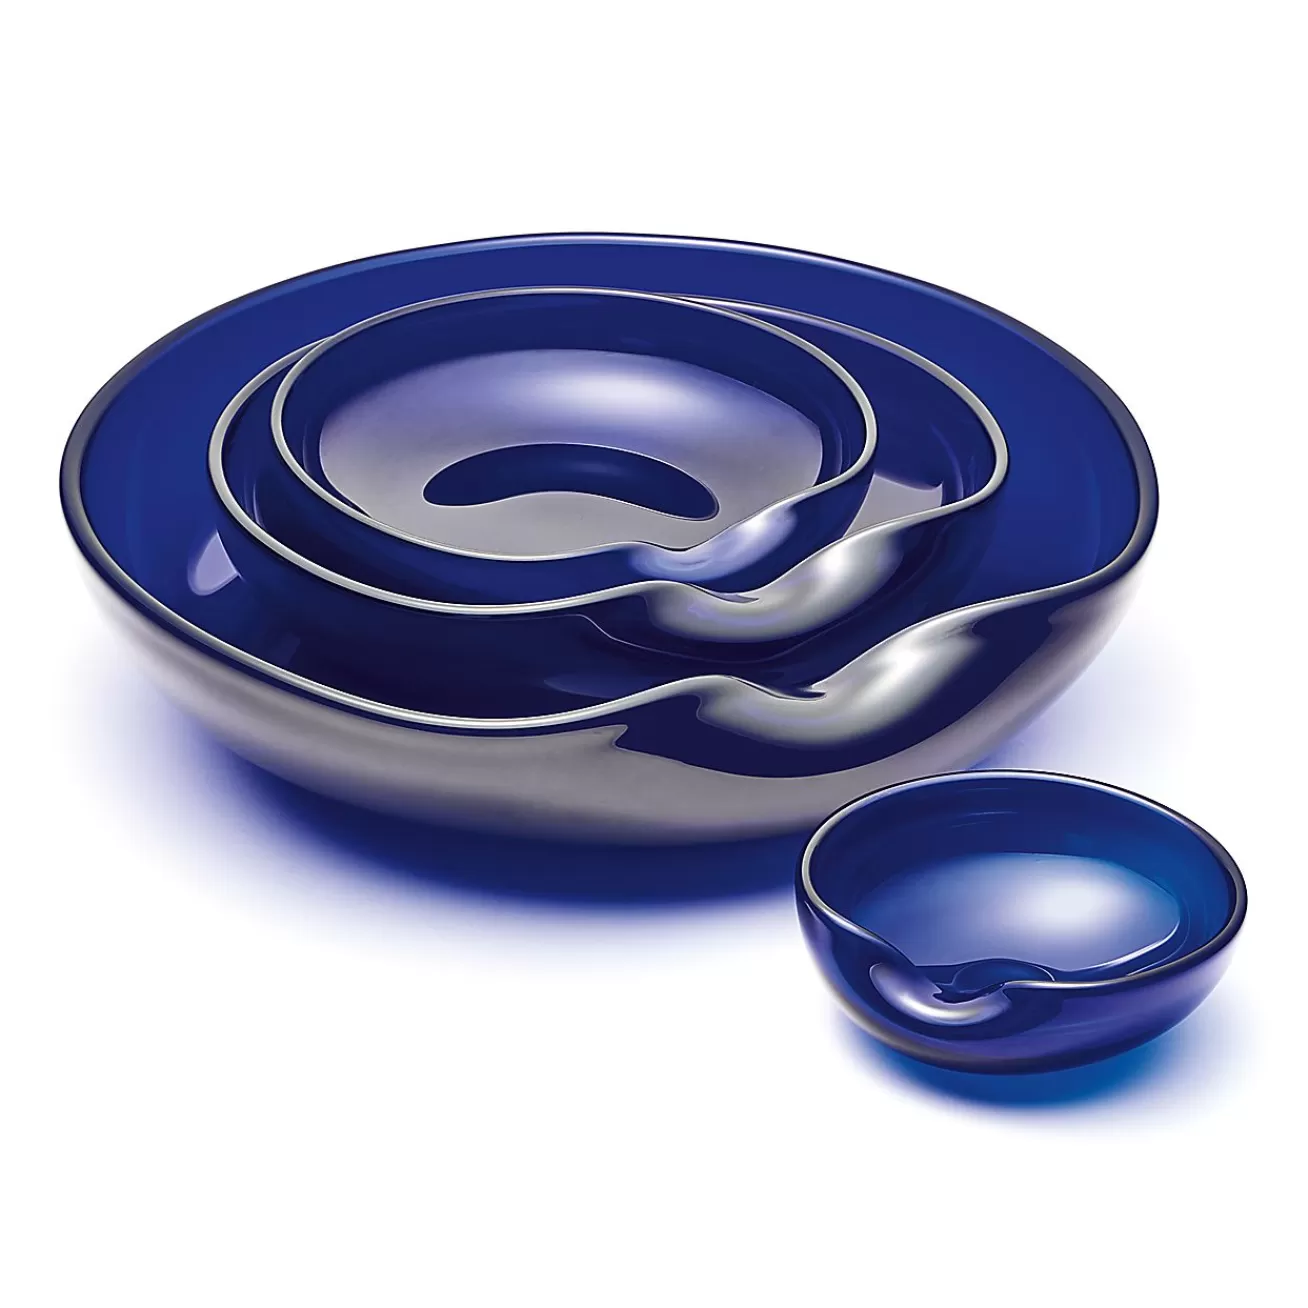 Tiffany & Co. Elsa Peretti® Thumbprint dish in cobalt Venetian glass. More sizes available. | ^ The Home | Housewarming Gifts